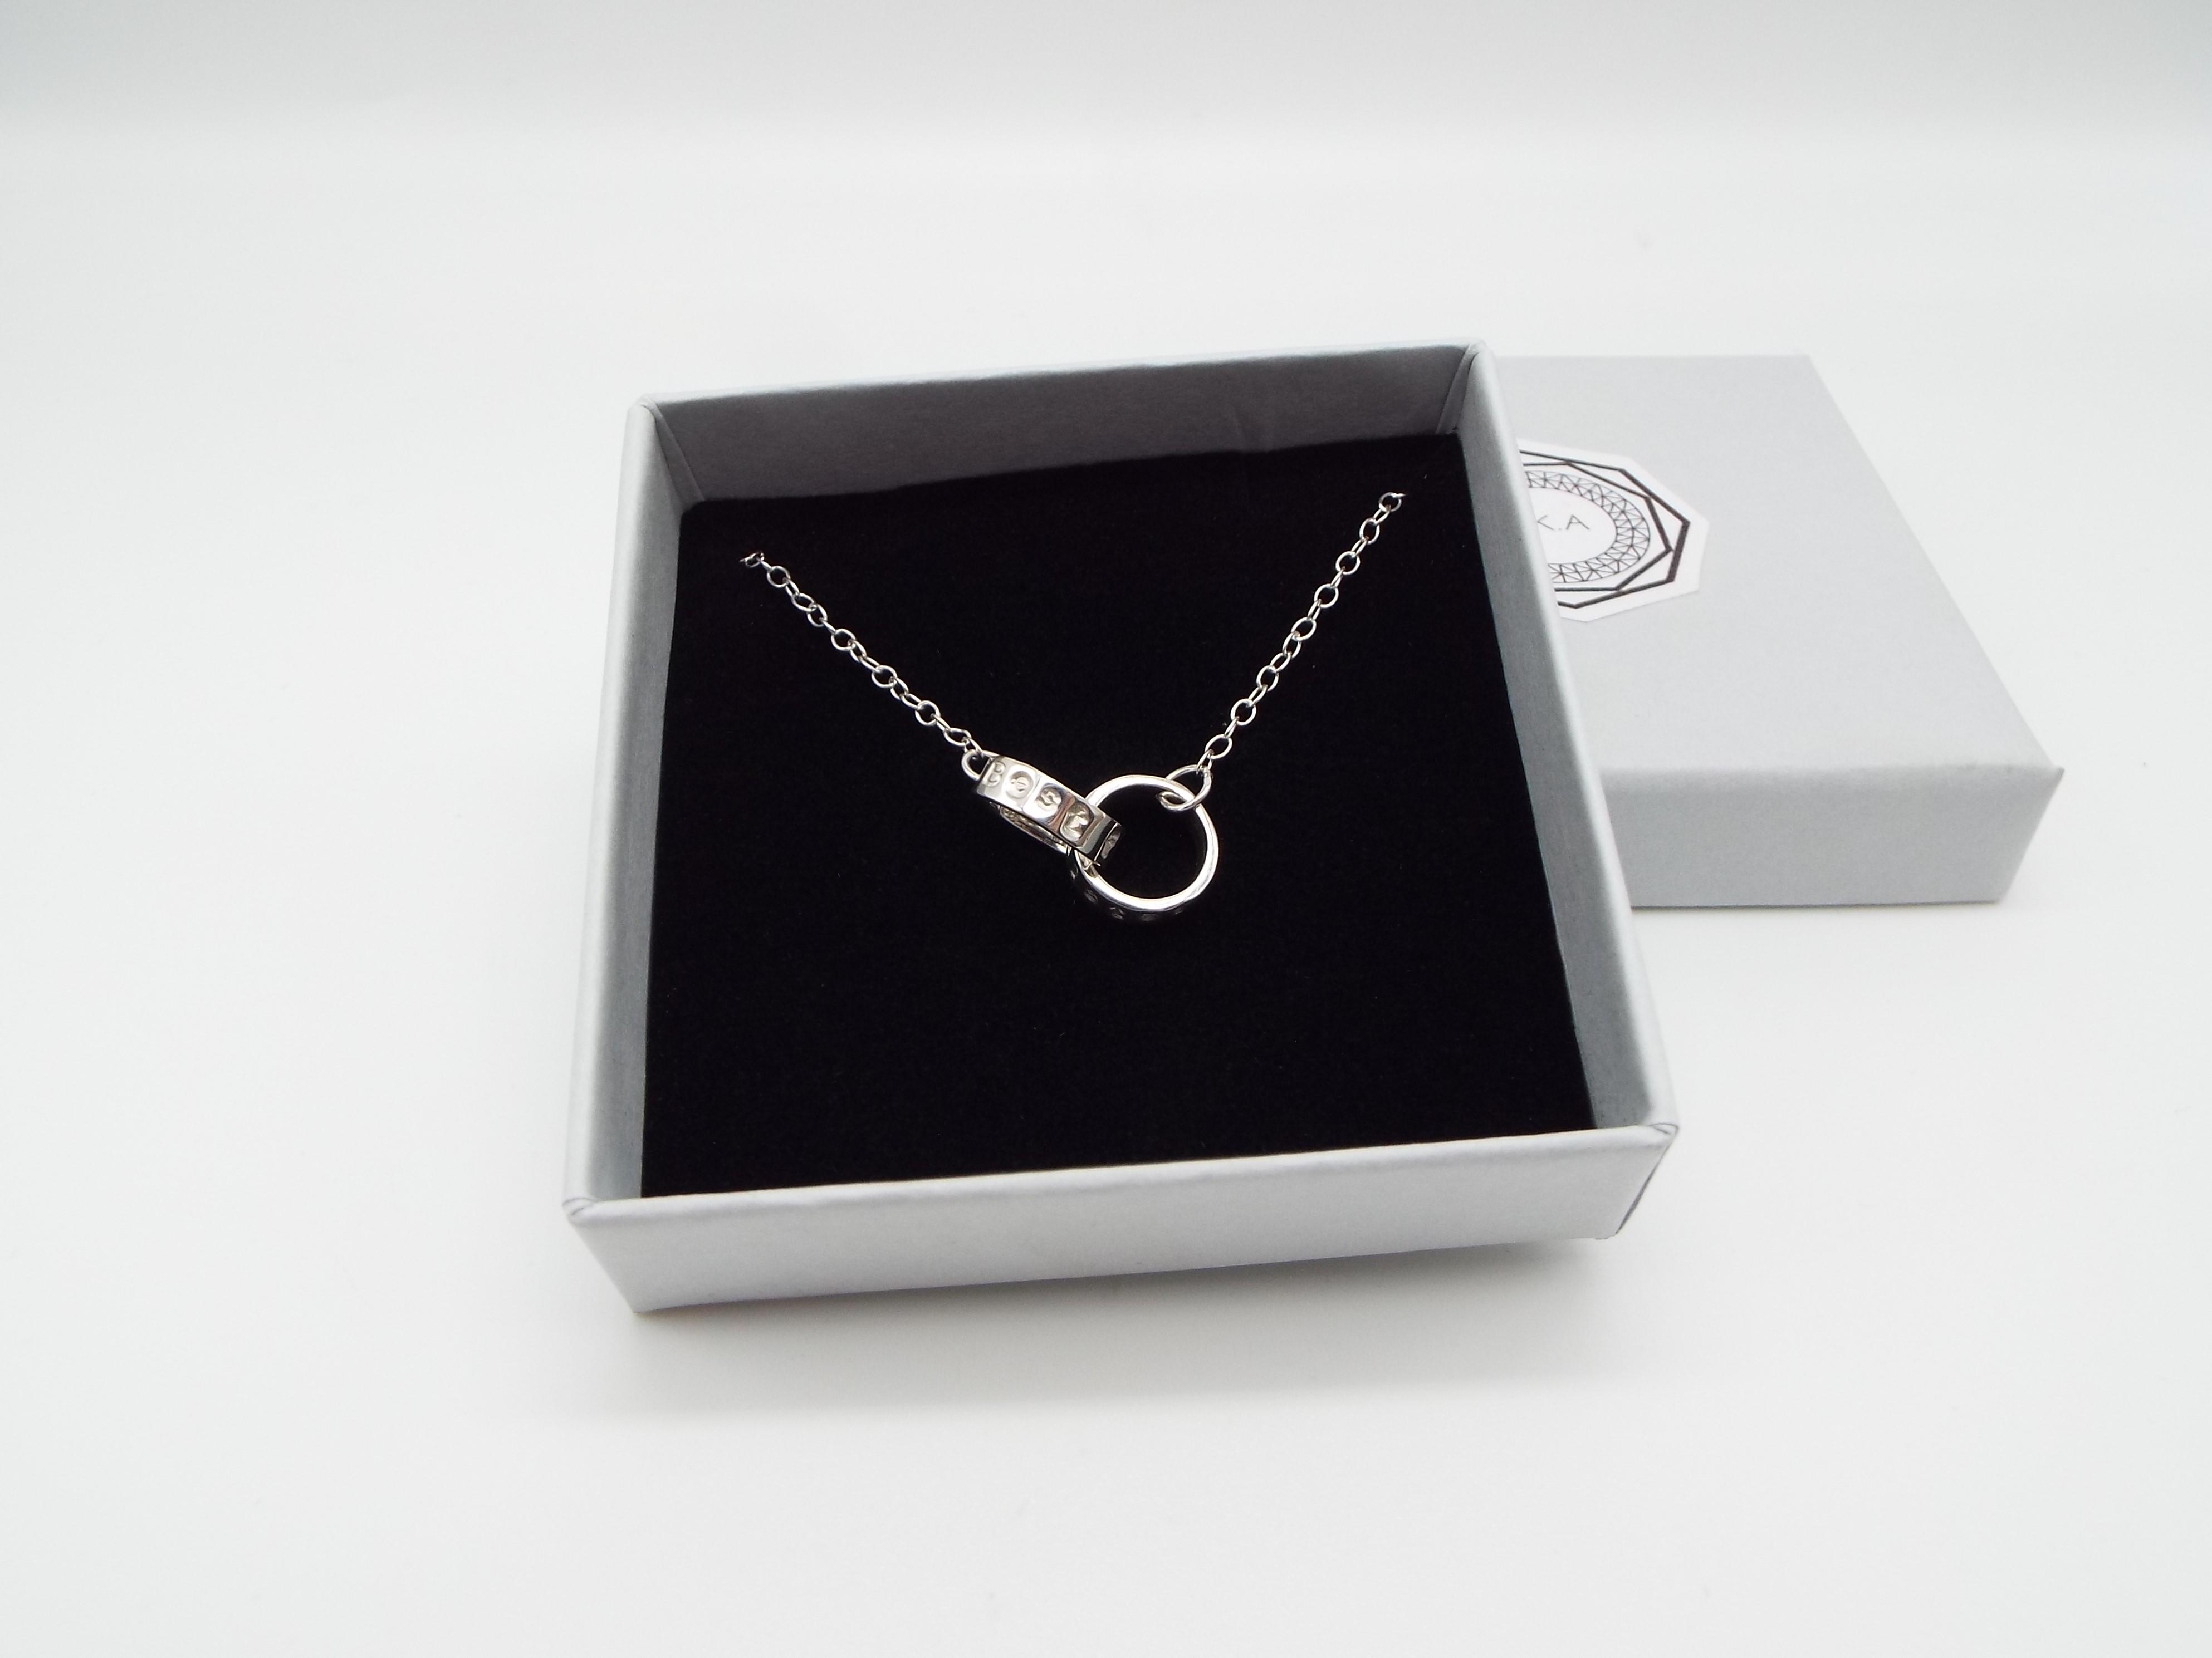 Silver charm necklace in a gift box